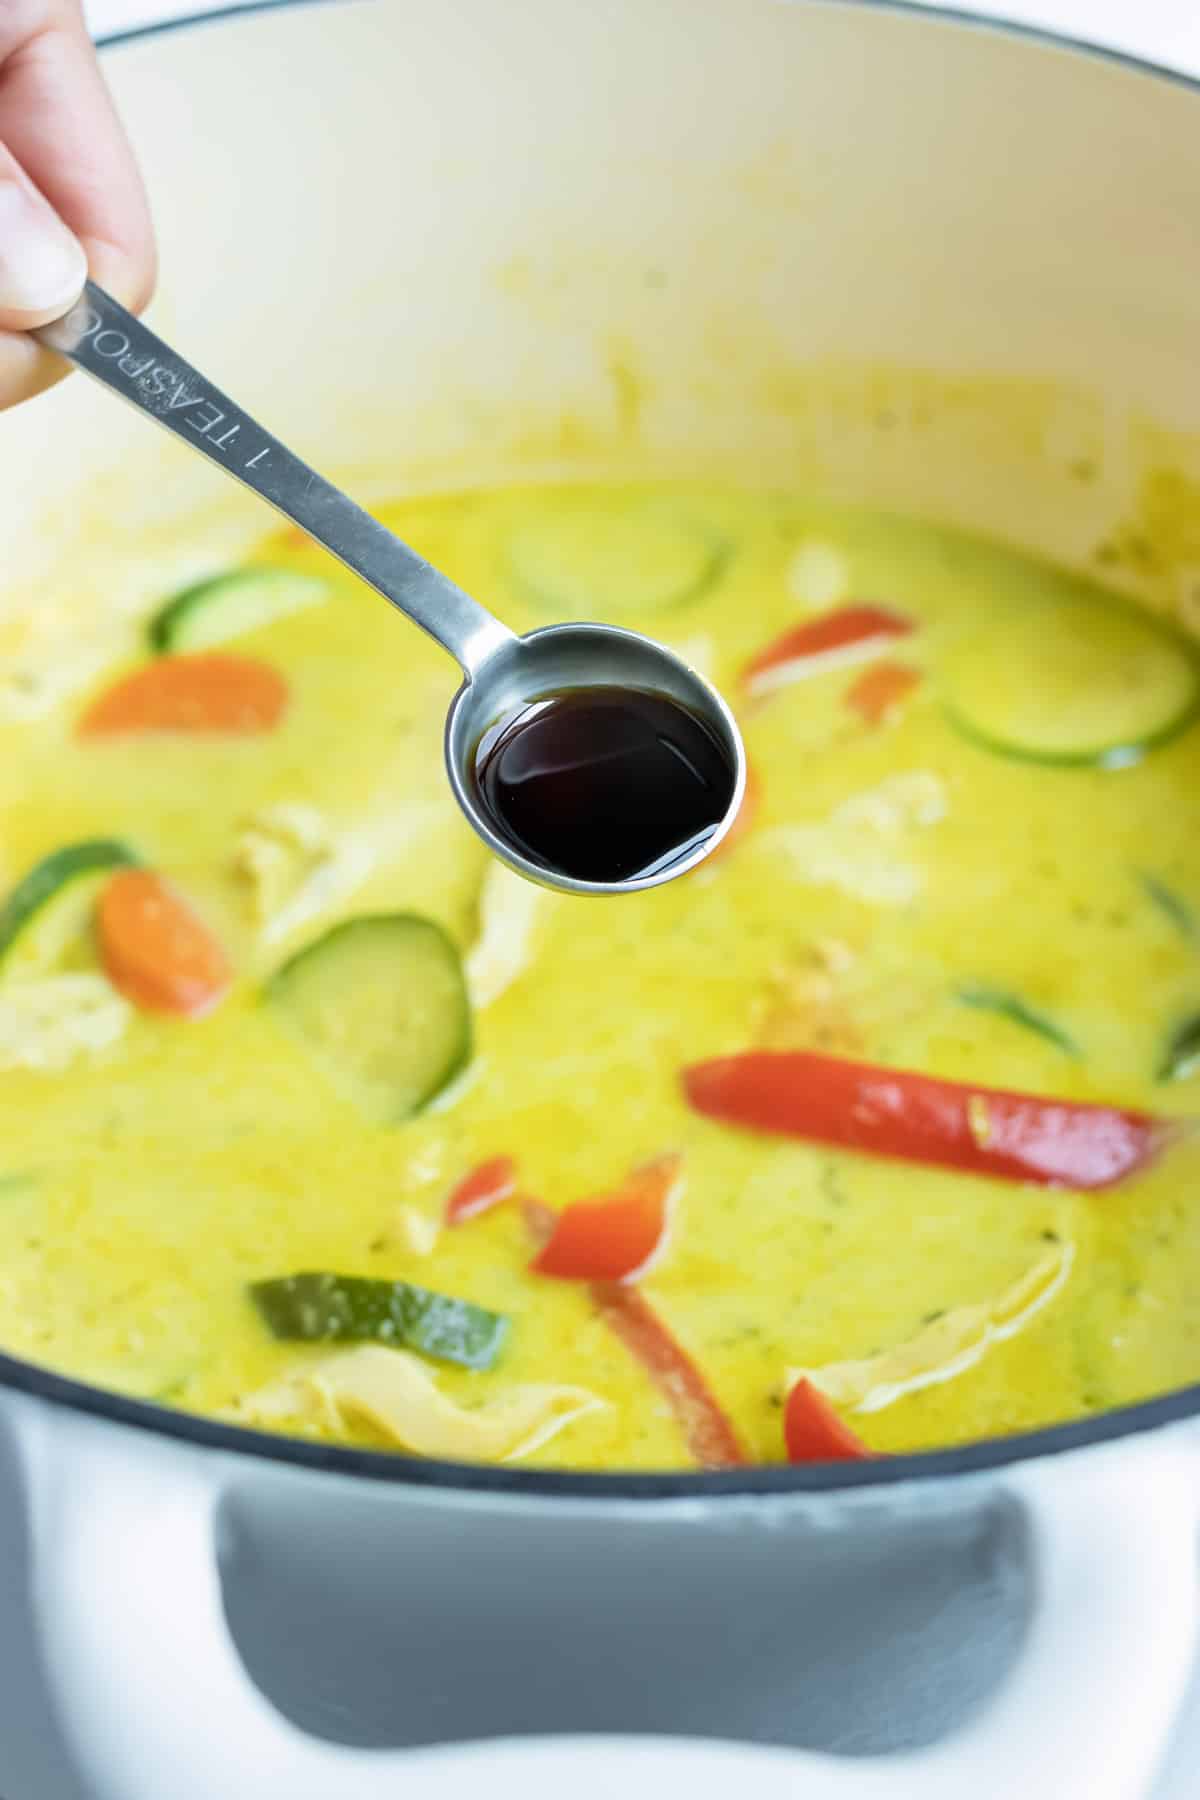 Soy sauce is added to this gluten-free green chicken curry.